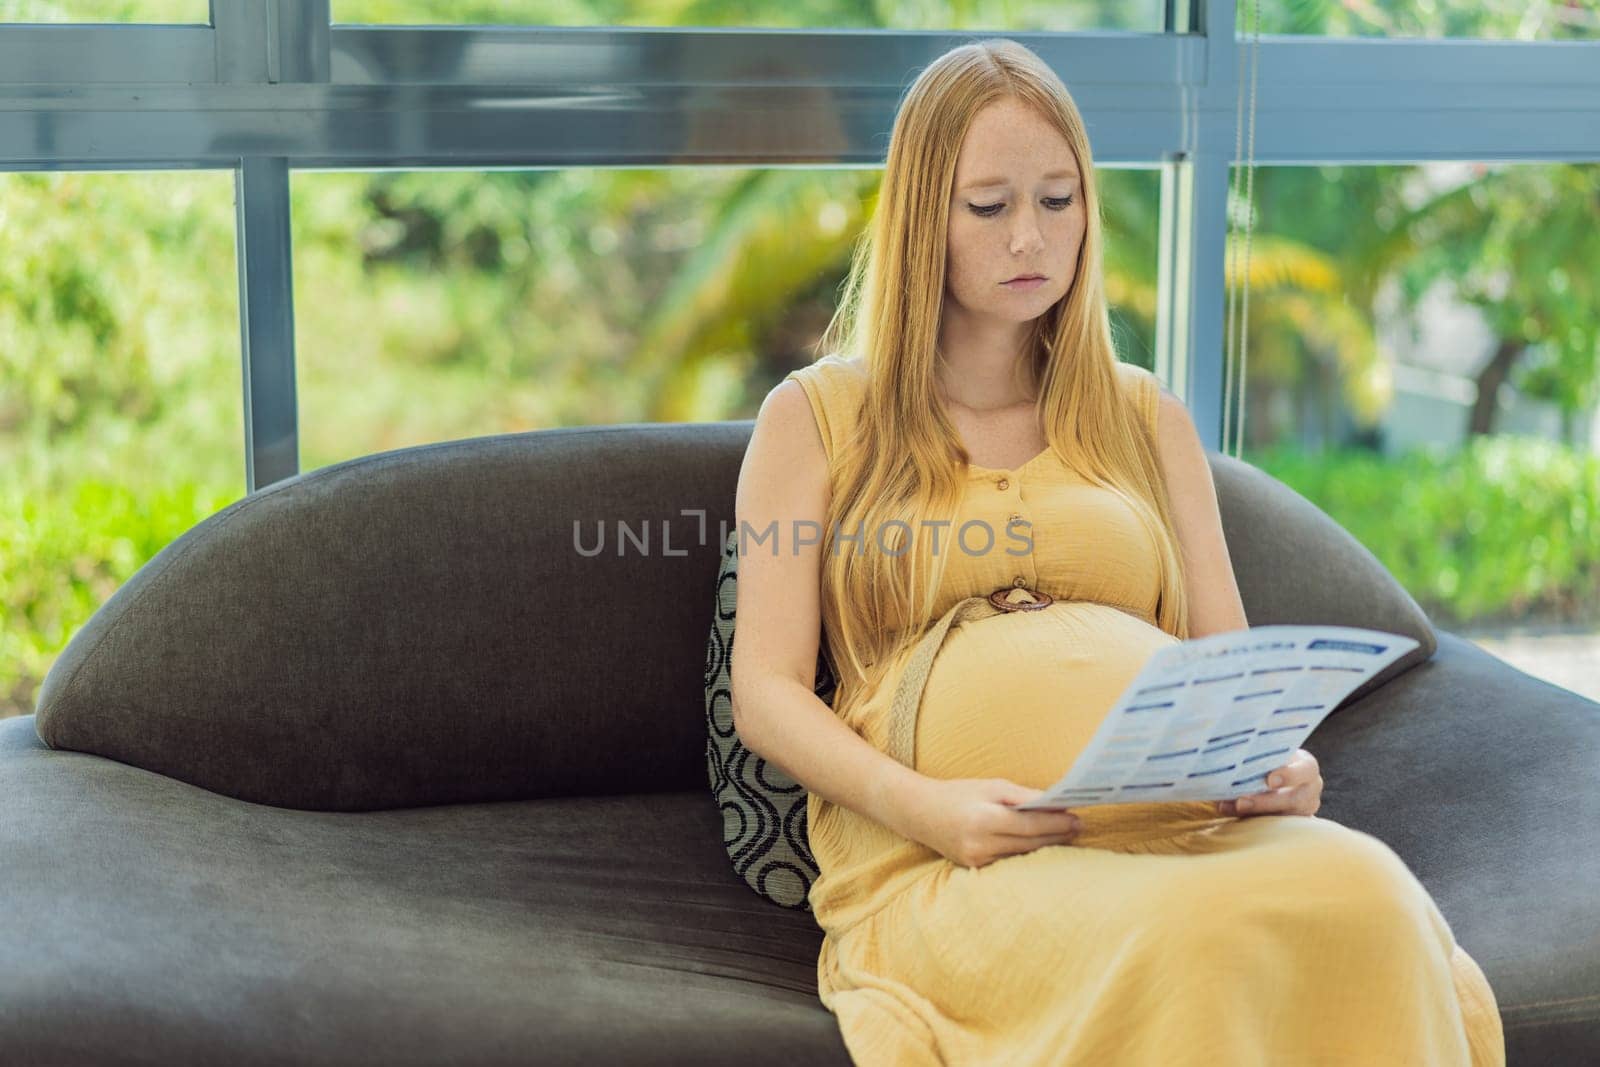 Expectant woman reviews her blood test results, contemplating the health of her pregnancy by galitskaya